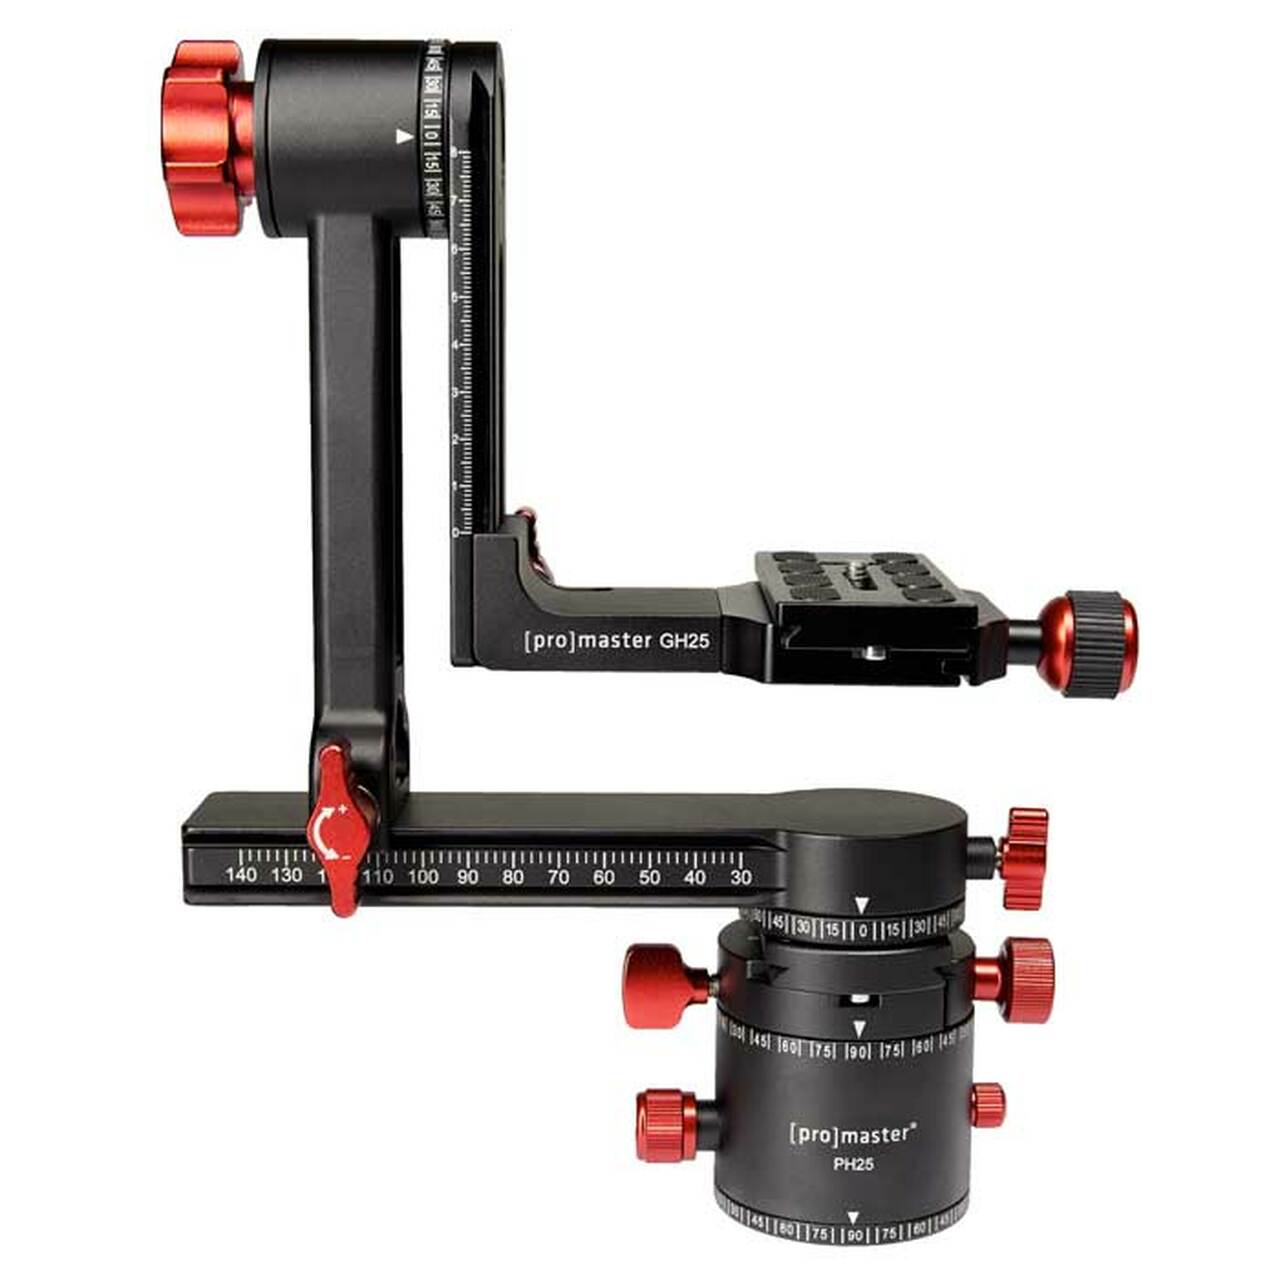 Promaster 7201 GH25K Professional  Gimbal Head Kit with PH25 Pano Head